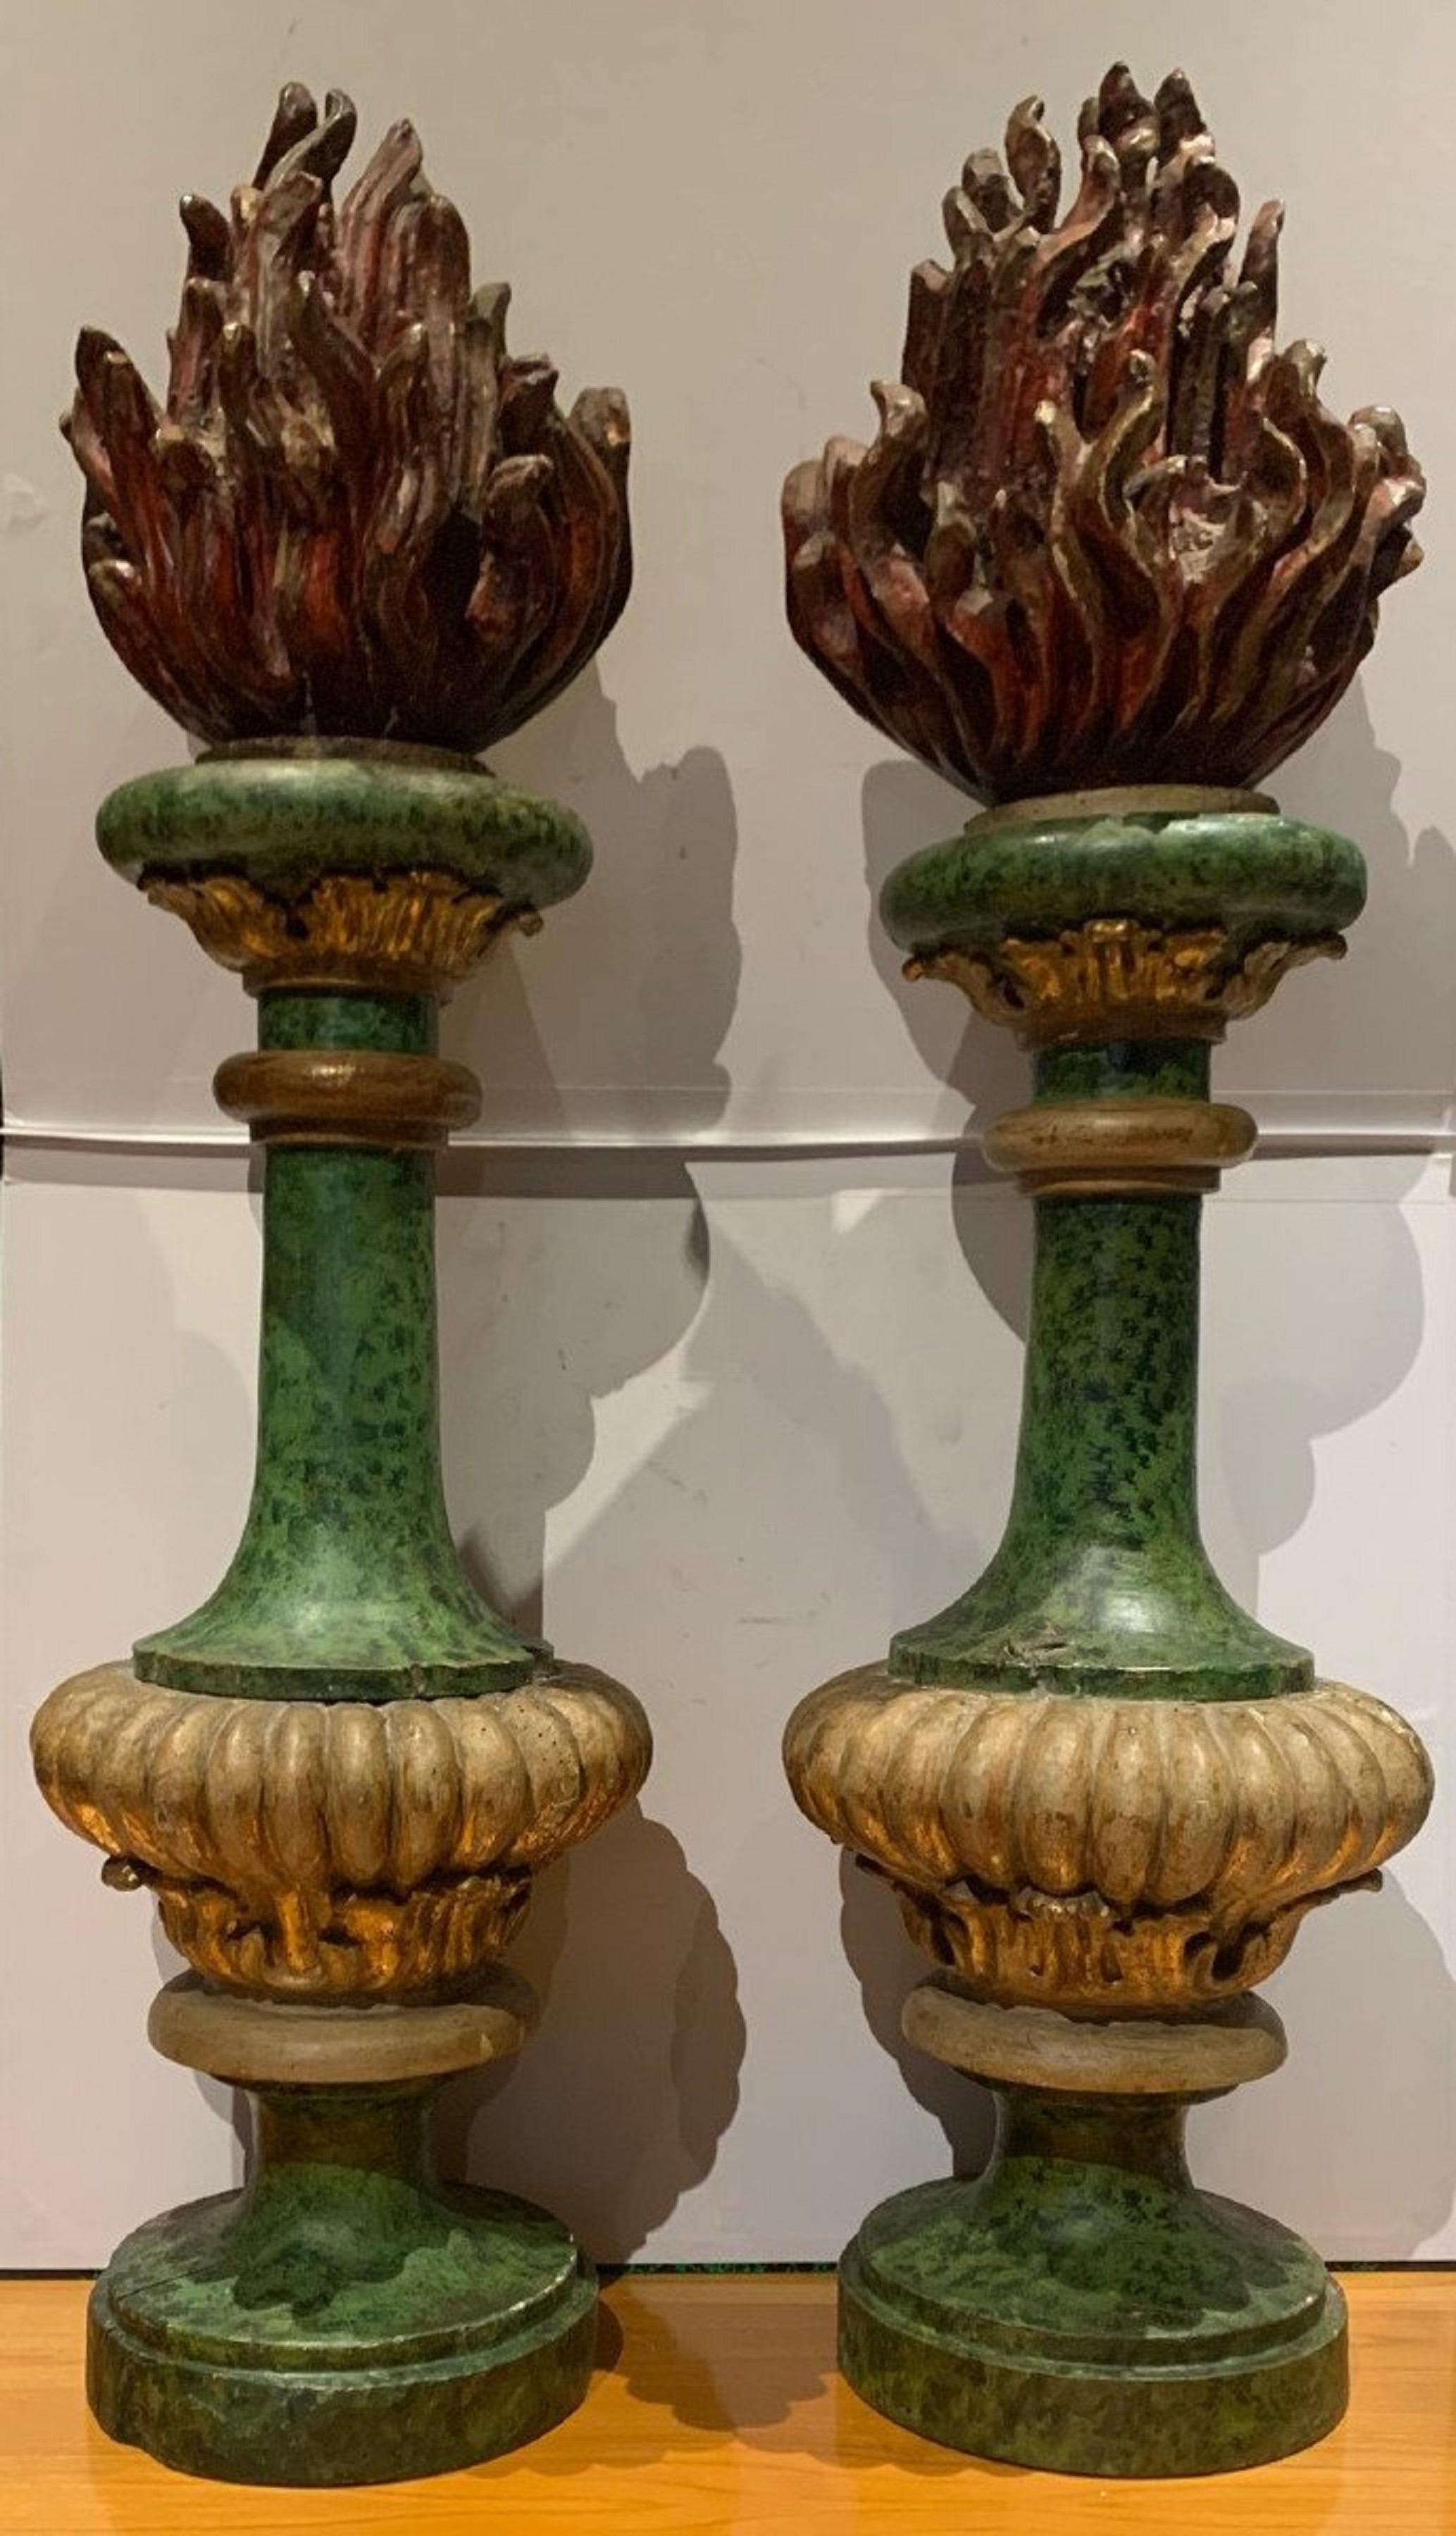 Pair of large fire pots from the Louis XIV period.
The painted and partially gilded carved wooden base
Surmounted by large flames in painted wood.
17th century period.
Probably elements of an altar (the back neither painted nor gilded).